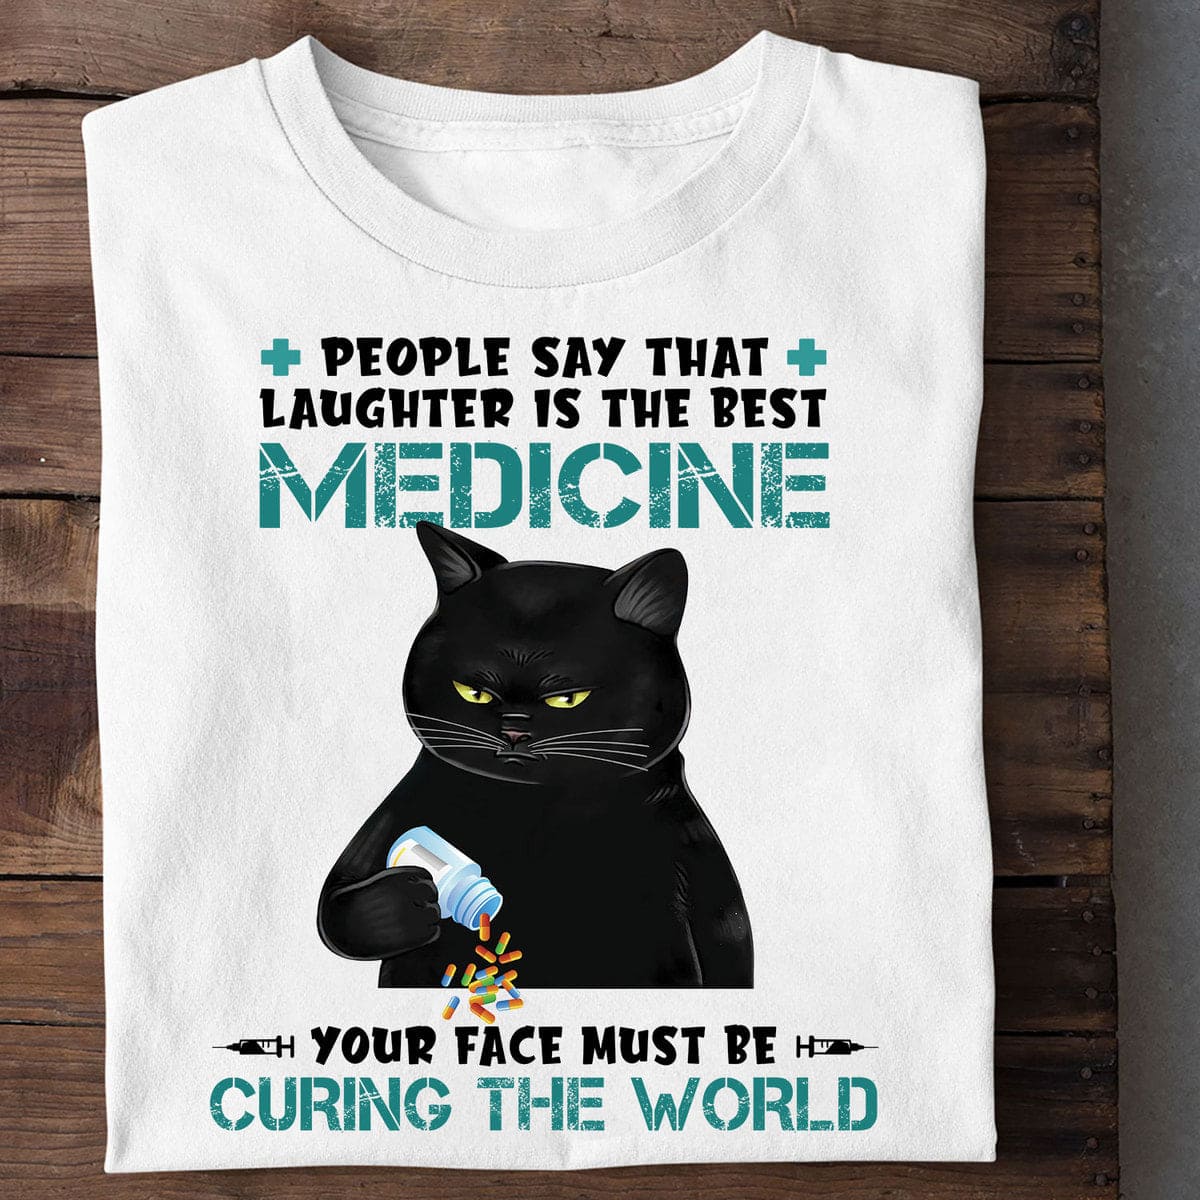 People say that laughter is the best medicine, your face must be curing the world - Black cat and aspirin